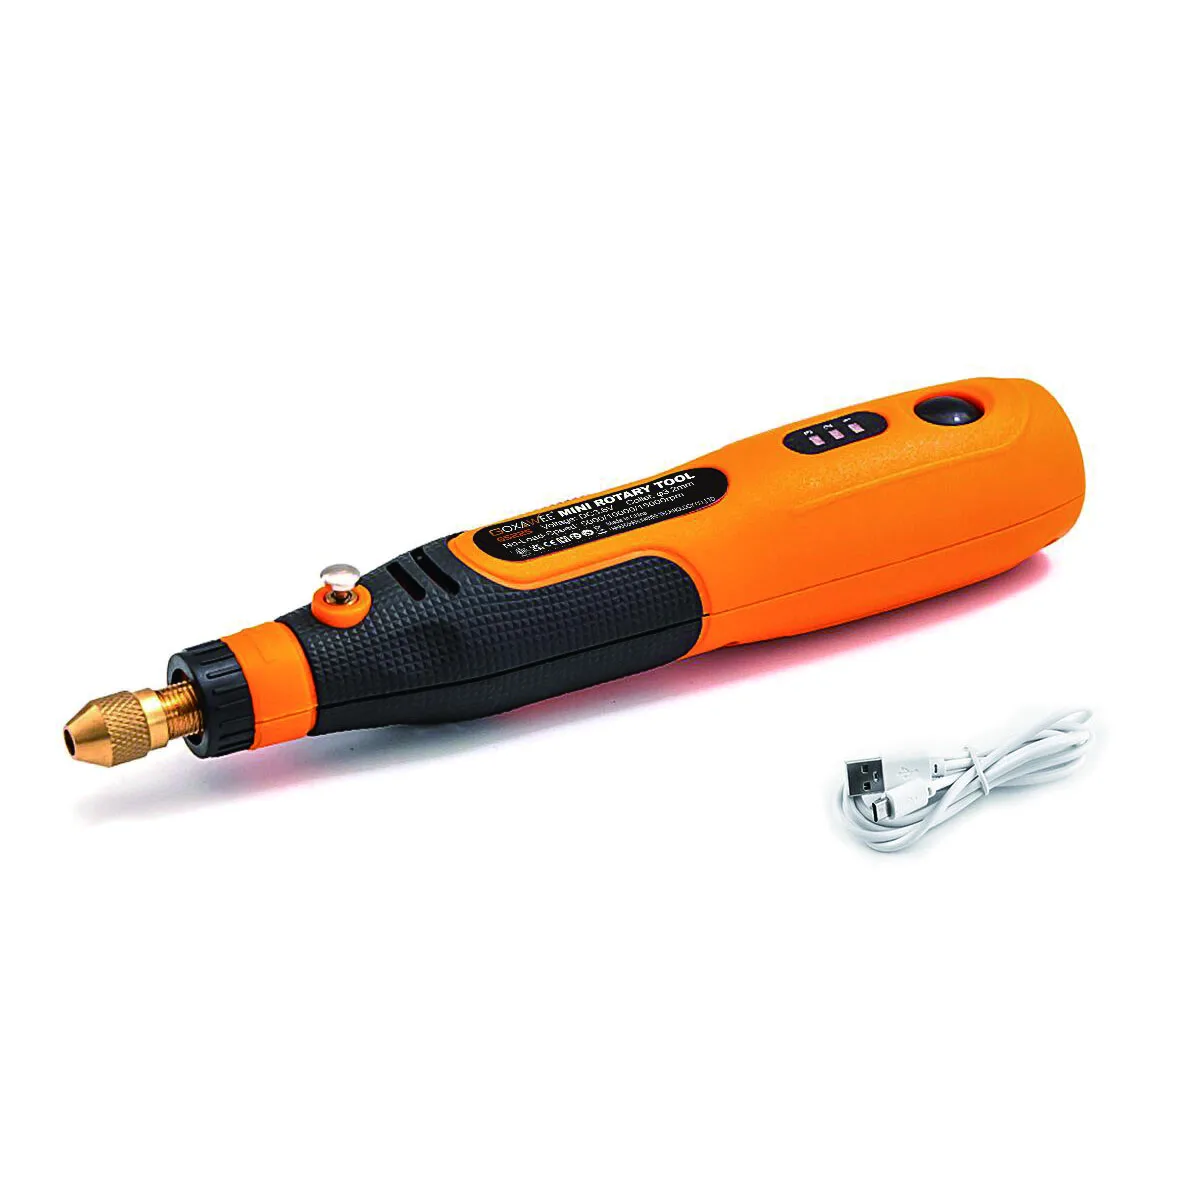 GOXAWEE Engraver Electric Cordless Mini Drill Grinder For Accessories USB variab - $372.37